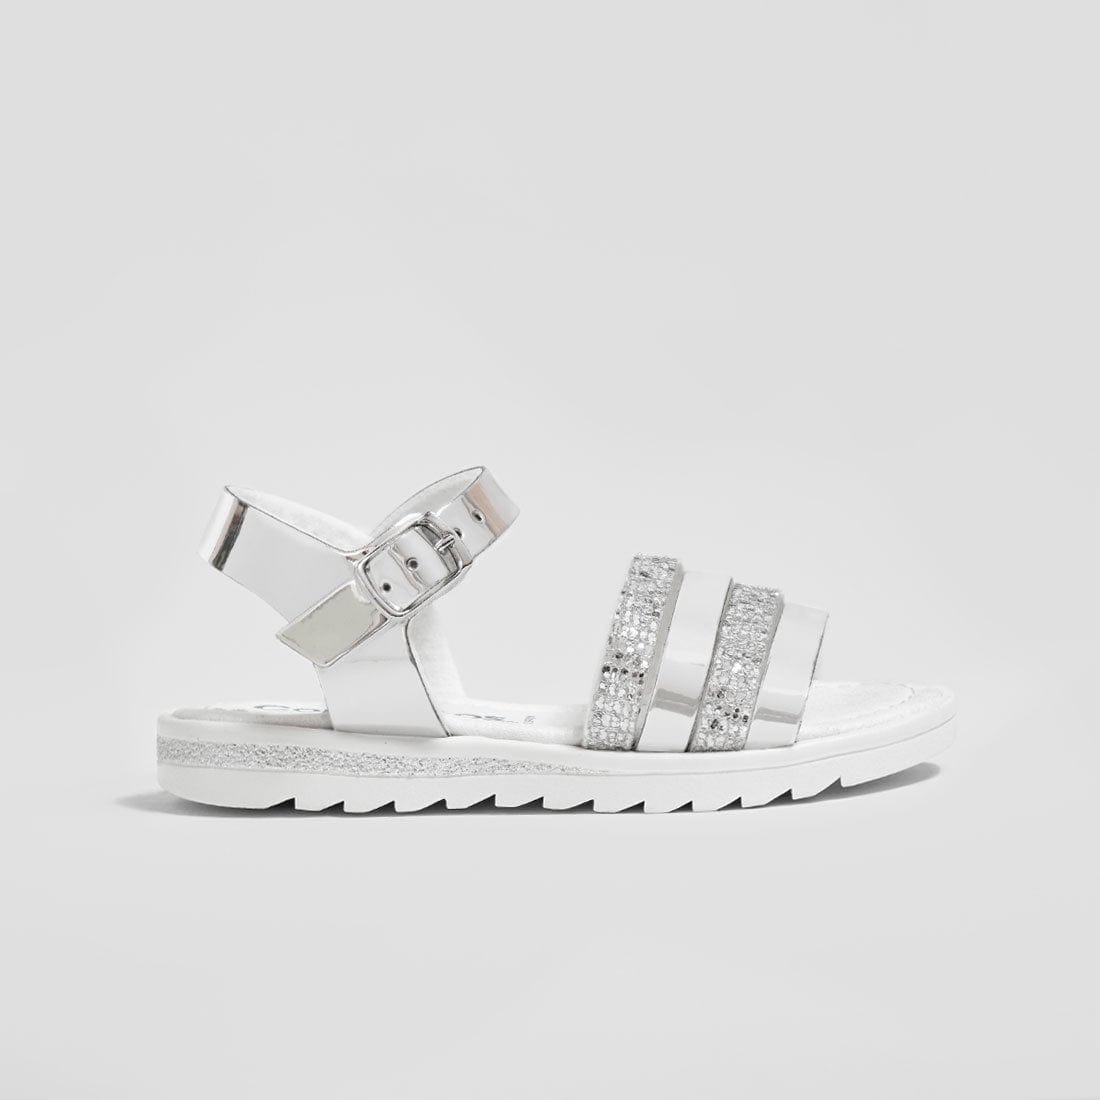 CONGUITOS Shoes Girl's Silver Glitter Mirror Sandals